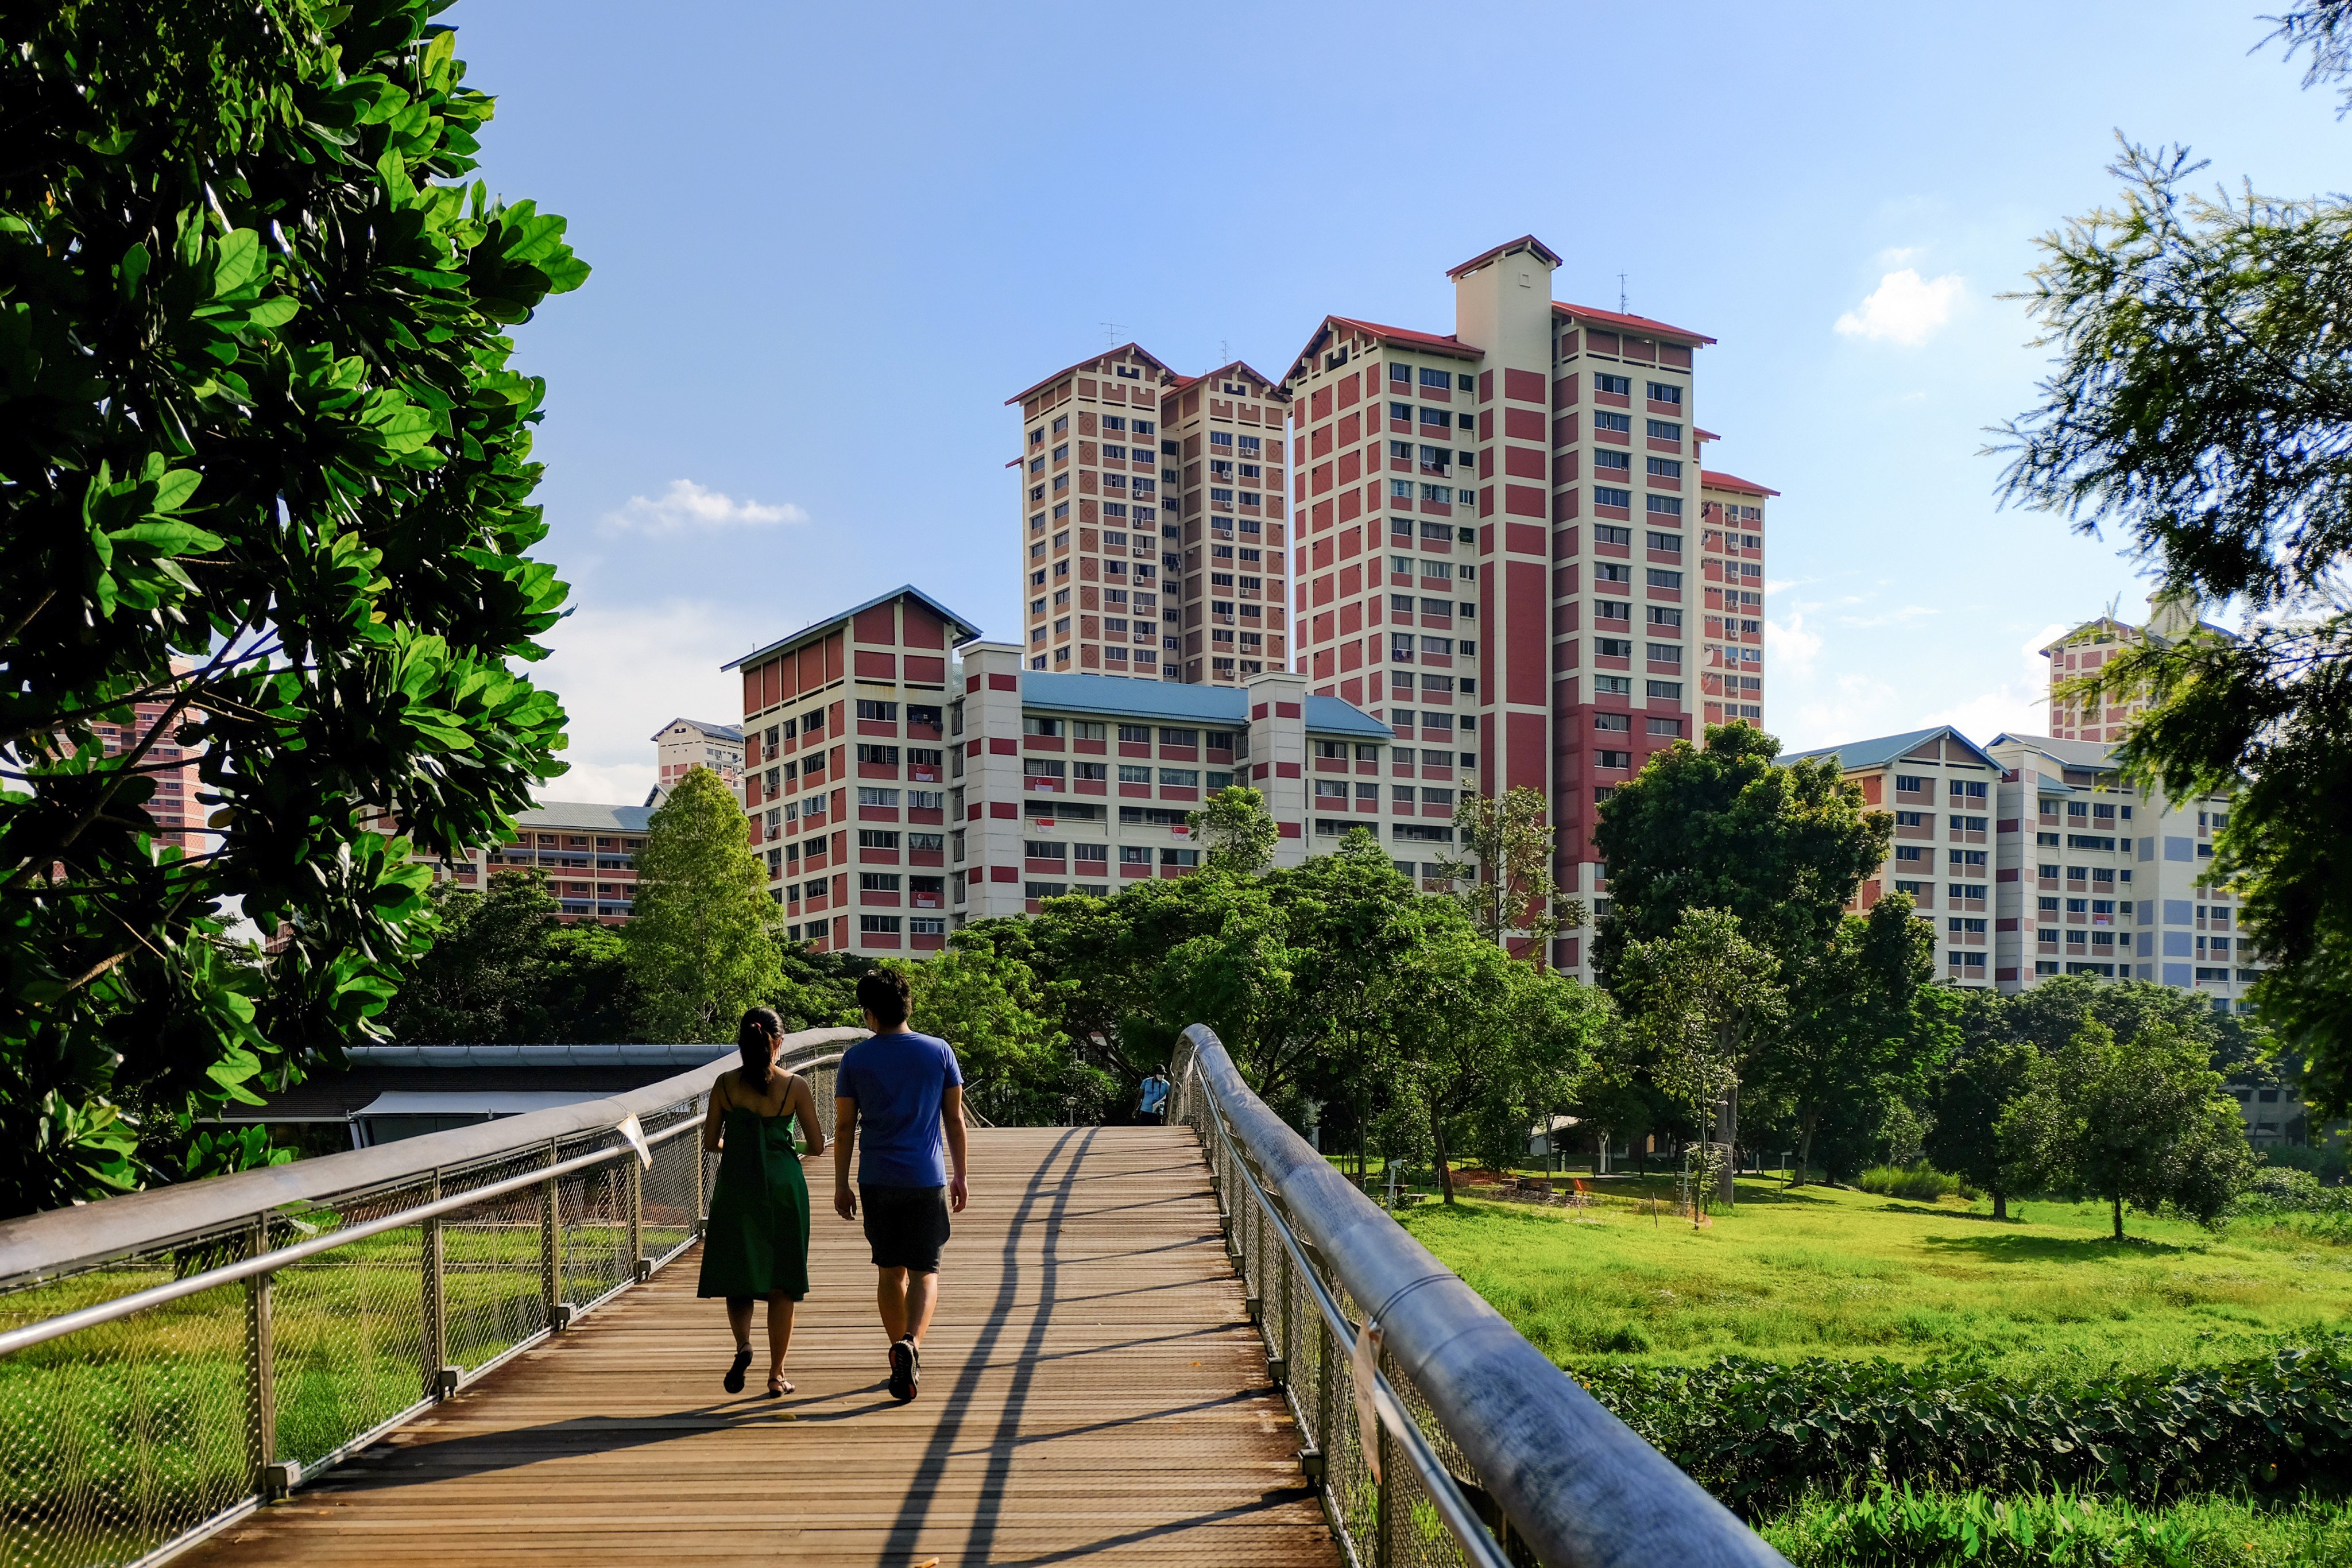 A couple walks through a neighbourhood park near high-rise public housing in Singapore. The Singapore government is increasing its efforts to tamp down speculation in an already-expensive housing market. Photo: Shutterstock